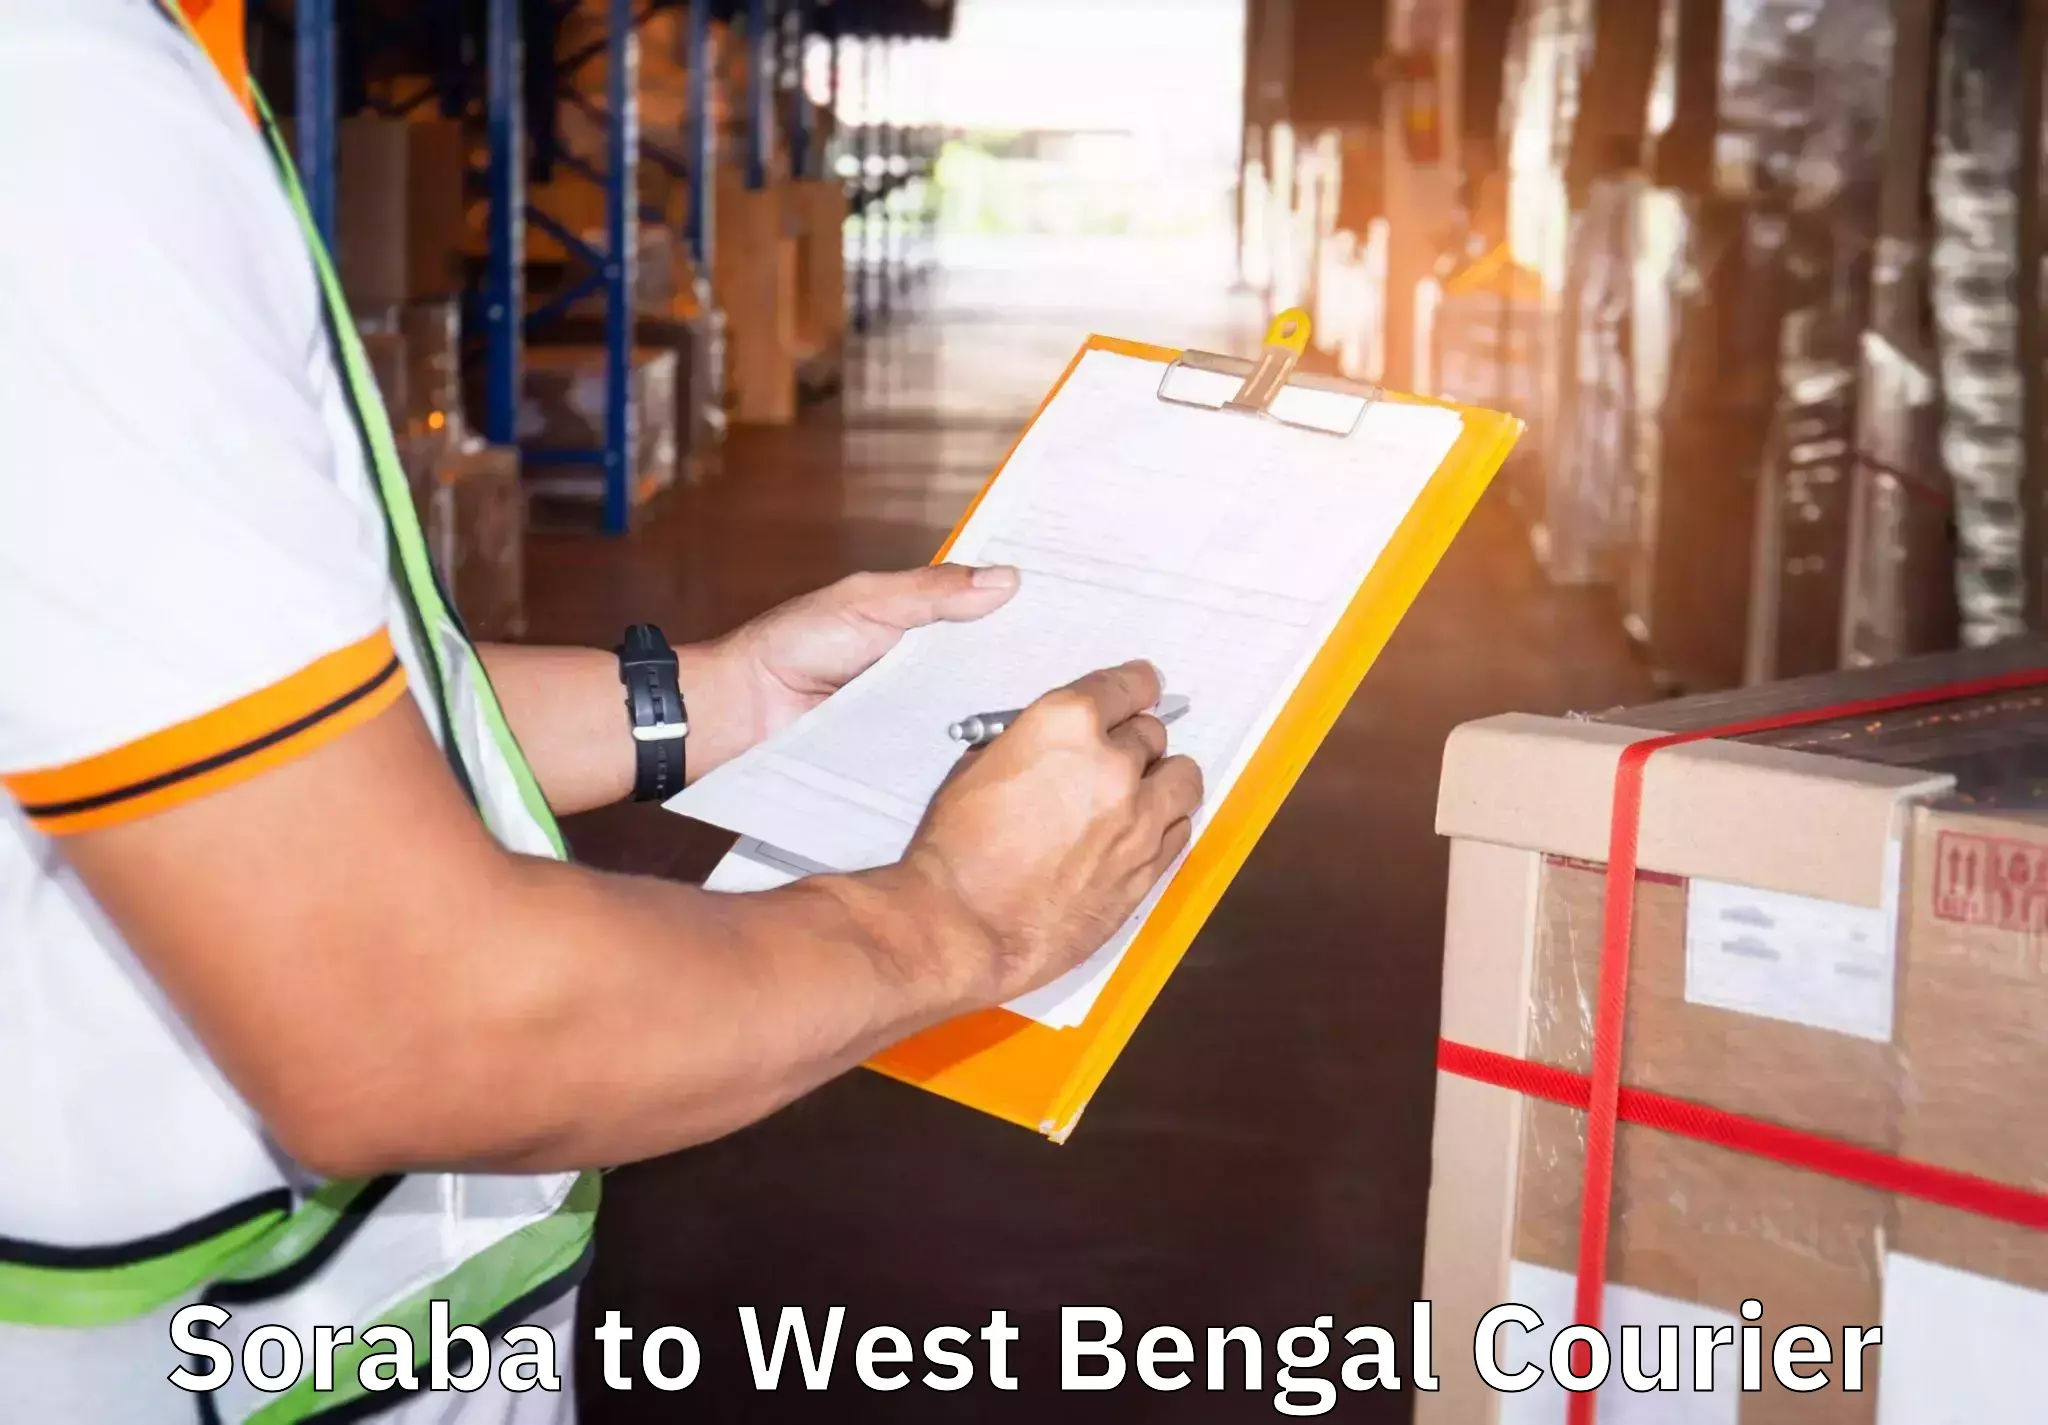 Quality relocation assistance in Soraba to Purba Medinipur